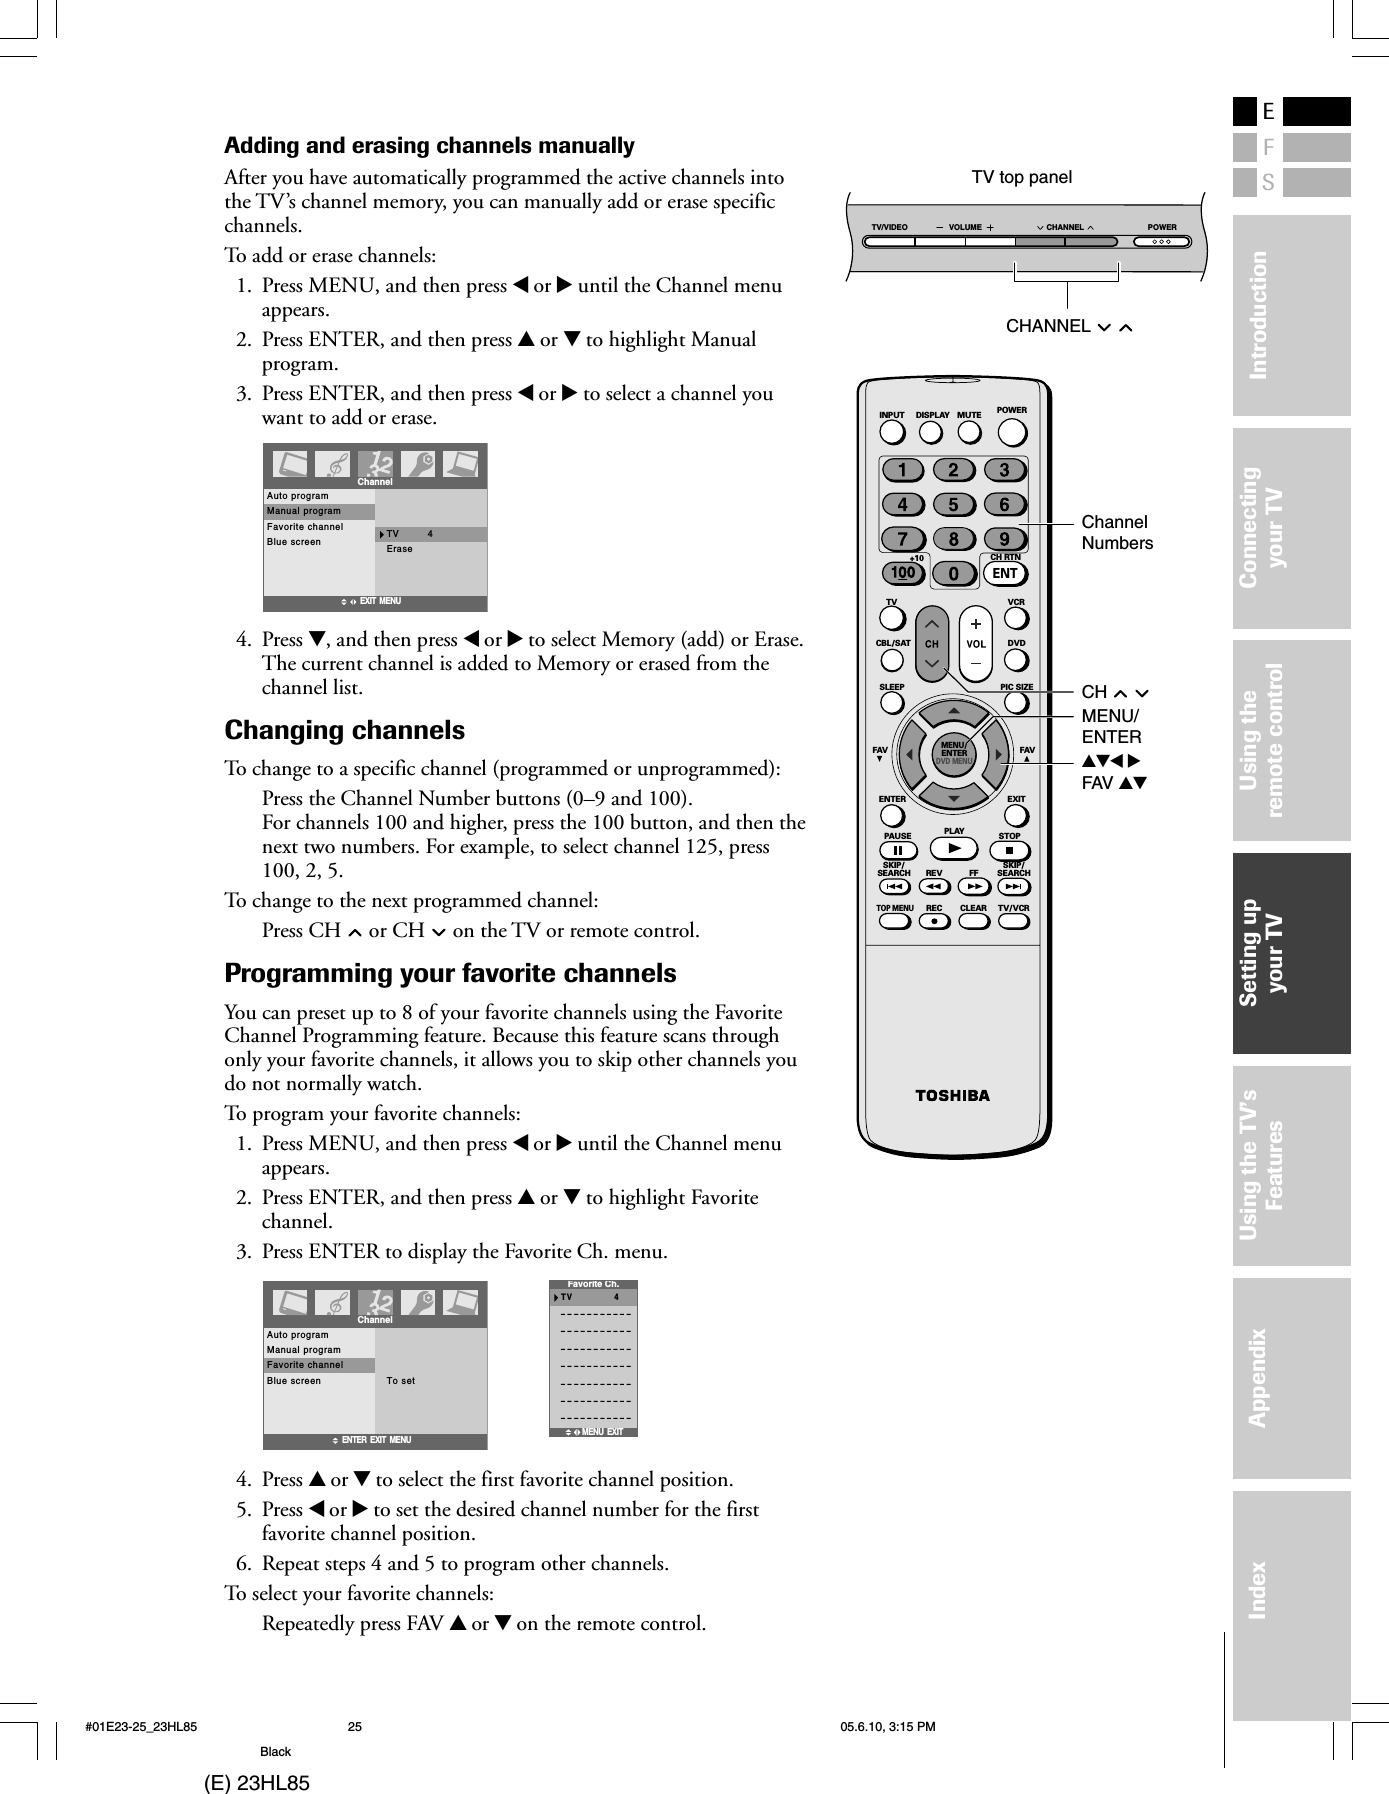 (E) 23HL85ESFUsing theremote controlUsing the TV’sFeaturesAppendixIndex IntroductionConnectingyour TVSetting upyour TVAdding and erasing channels manuallyAfter you have automatically programmed the active channels intothe TV’s channel memory, you can manually add or erase specificchannels.To add or erase channels:1. Press MENU, and then press x or • until the Channel menuappears.2. Press ENTER, and then press y or z to highlight Manualprogram.3. Press ENTER, and then press x or • to select a channel youwant to add or erase.TV         4EraseEXIT  MENUAuto programManual programFavorite channelBlue screenChannel4. Press z, and then press x or • to select Memory (add) or Erase.The current channel is added to Memory or erased from thechannel list.Changing channelsTo change to a specific channel (programmed or unprogrammed):Press the Channel Number buttons (0–9 and 100).For channels 100 and higher, press the 100 button, and then thenext two numbers. For example, to select channel 125, press100, 2, 5.To change to the next programmed channel:Press CH   or CH   on the TV or remote control.Programming your favorite channelsYou can preset up to 8 of your favorite channels using the FavoriteChannel Programming feature. Because this feature scans throughonly your favorite channels, it allows you to skip other channels youdo not normally watch.To program your favorite channels:1. Press MENU, and then press x or • until the Channel menuappears.2. Press ENTER, and then press y or z to highlight Favoritechannel.3. Press ENTER to display the Favorite Ch. menu.To setENTER  EXIT  MENUAuto programManual programFavorite channelBlue screenChannelTV        4–––––––––––––––––––––––––––––––––––––––––––––––––––––––––––––––––––––––––––––Favorite Ch.MENU EXIT4. Press y or z to select the first favorite channel position.5. Press x or • to set the desired channel number for the firstfavorite channel position.6. Repeat steps 4 and 5 to program other channels.To select your favorite channels:Repeatedly press FAV y or z on the remote control.SKIP/SEARCH SKIP/SEARCHCLEARREC TV/VCRTOP MENUREV FFPAUSE PLAY STOPENTER EXITFAV FAVSLEEP PIC SIZEMENU/ENTERDVD MENUCBL/SAT DVDTV VCR+10 CH RTNINPUT DISPLAY MUTEPOWERENTTV top panelPOWERTV/VIDEO VOLUME CHANNELCHANNEL   ChannelNumbersMENU/ENTERCH   yzx •FAV yz#01E23-25_23HL85 05.6.10, 3:15 PM25Black